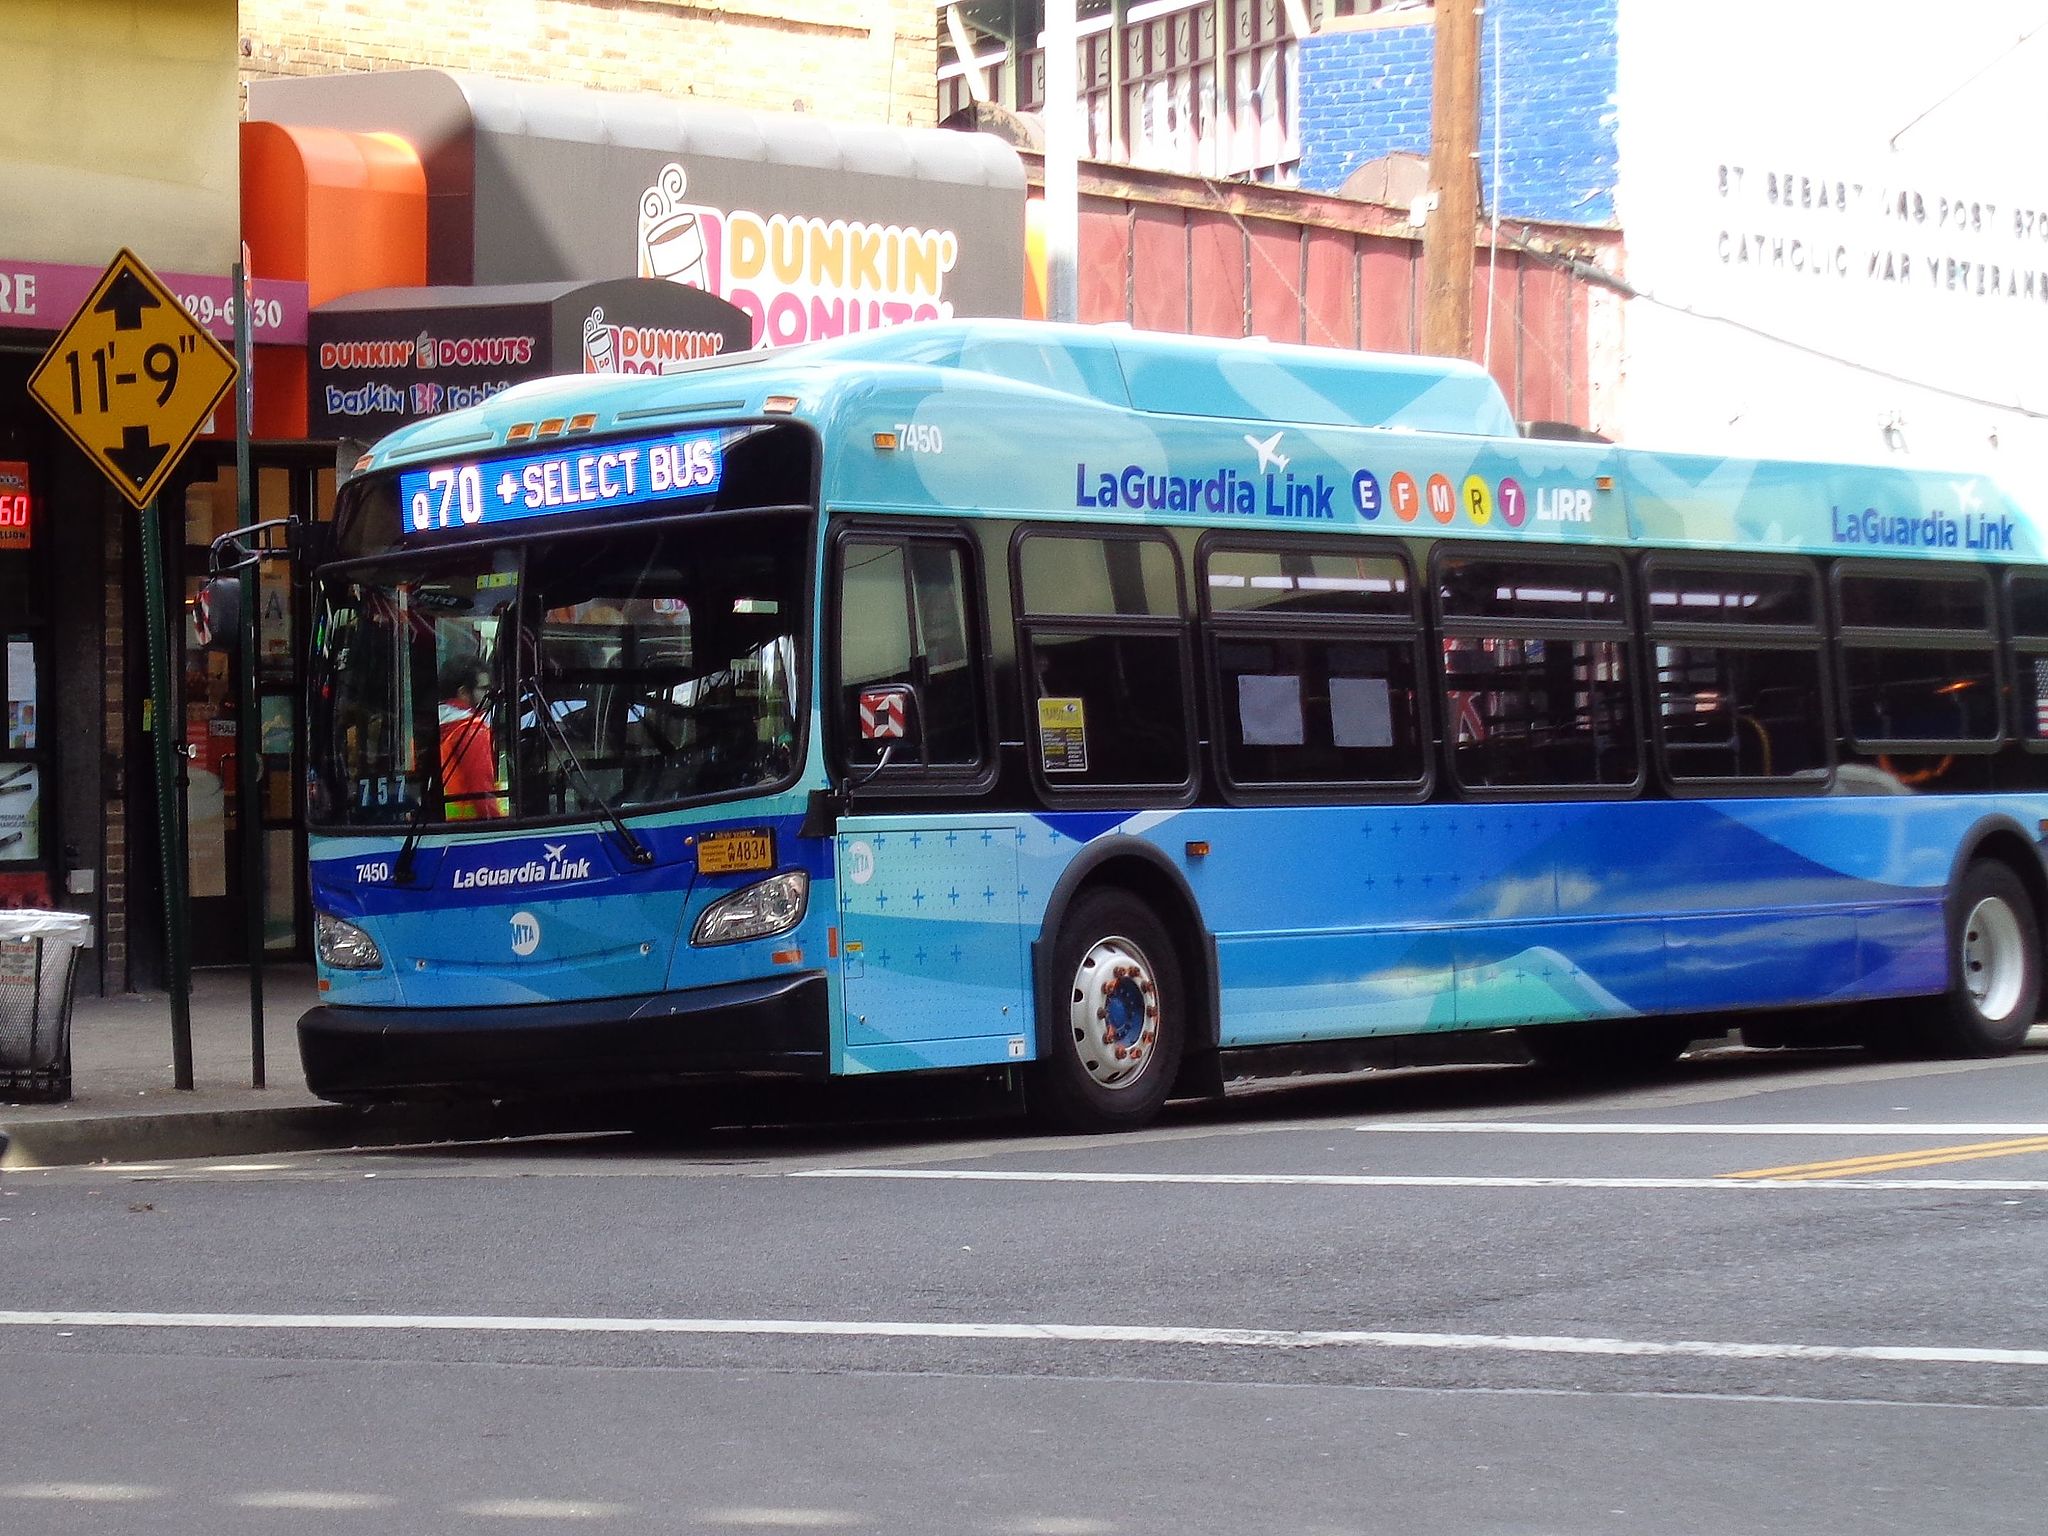 A bus in blue livery on a street